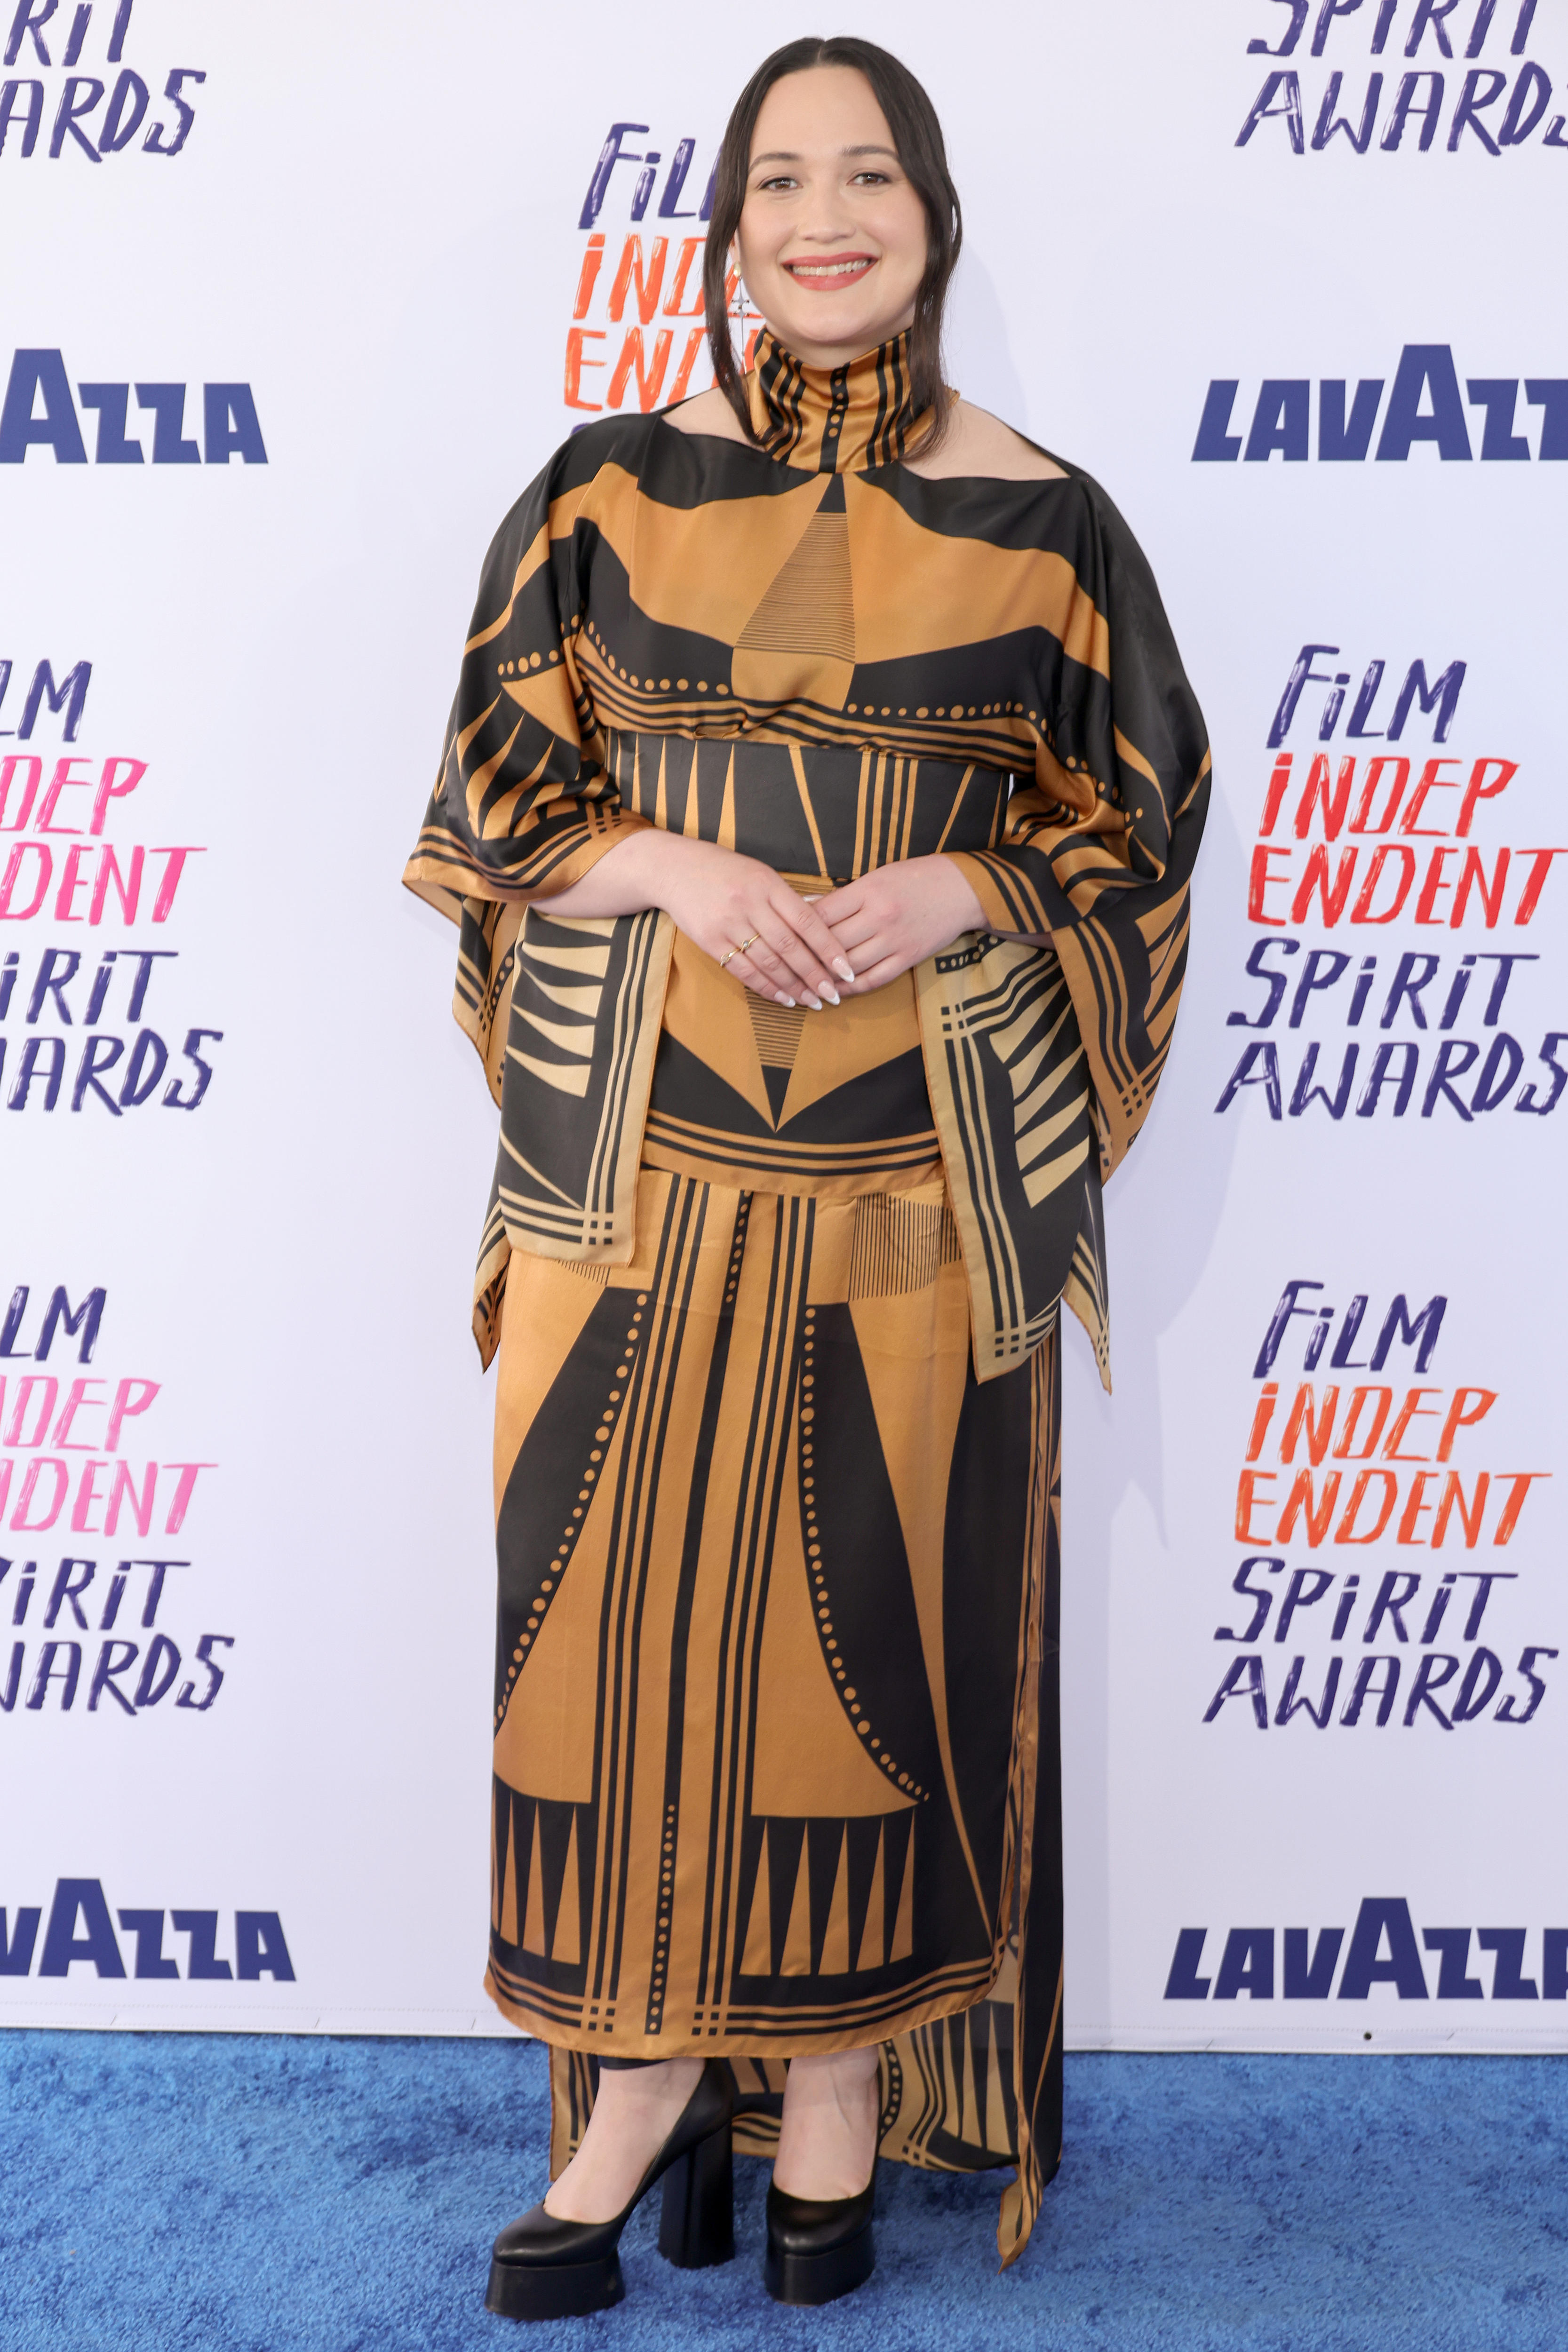 Lily Gladstone poses on the red carpet at the Independent Spirit awards